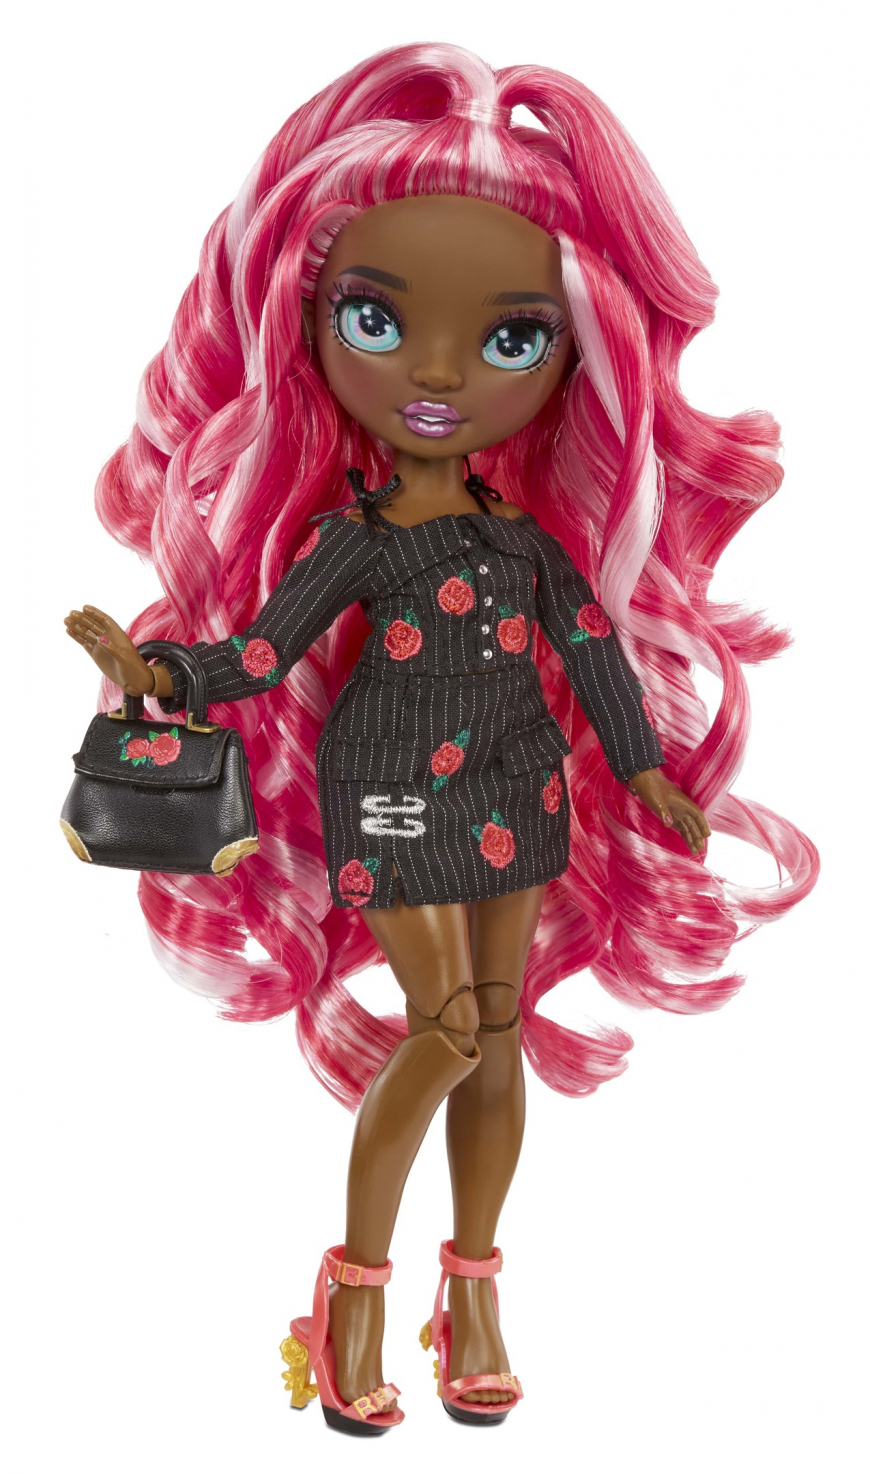 Rainbow High Series 3 Rose doll Daria Roselyn doll In second outfit